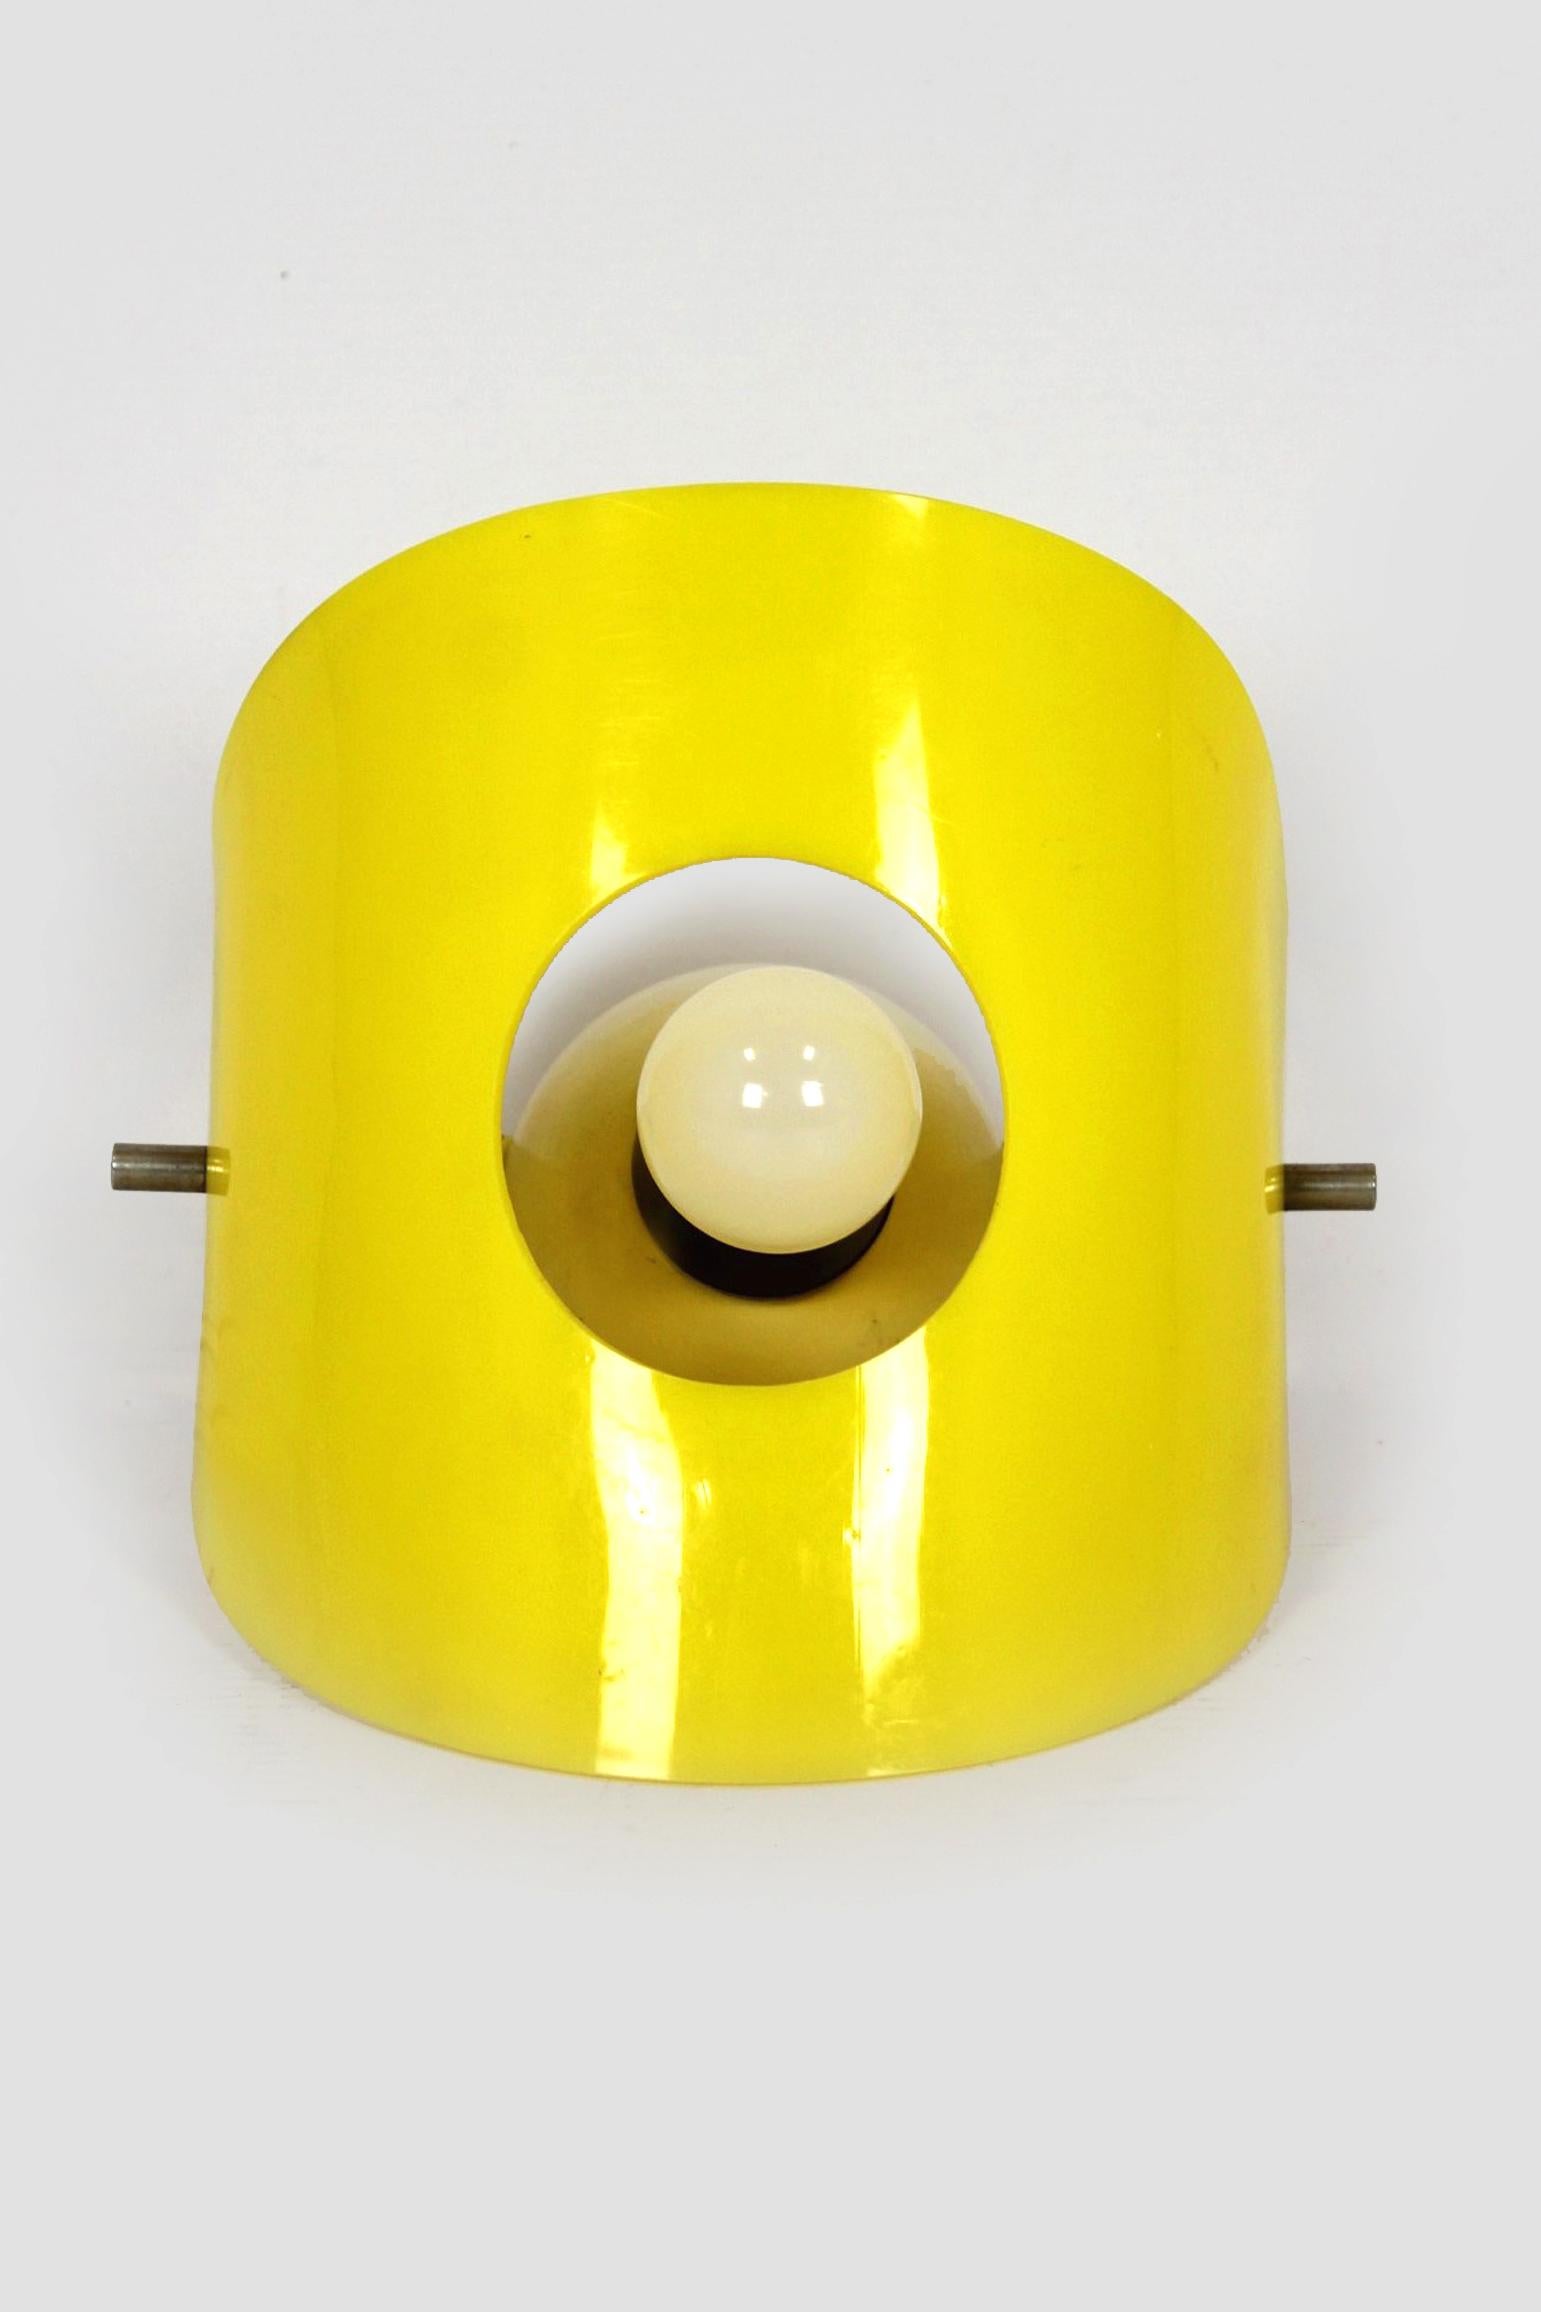 This space age style wall lamp was produced in Poland in the 1960s by Polam Meos. Original, good condition, fully functional.
